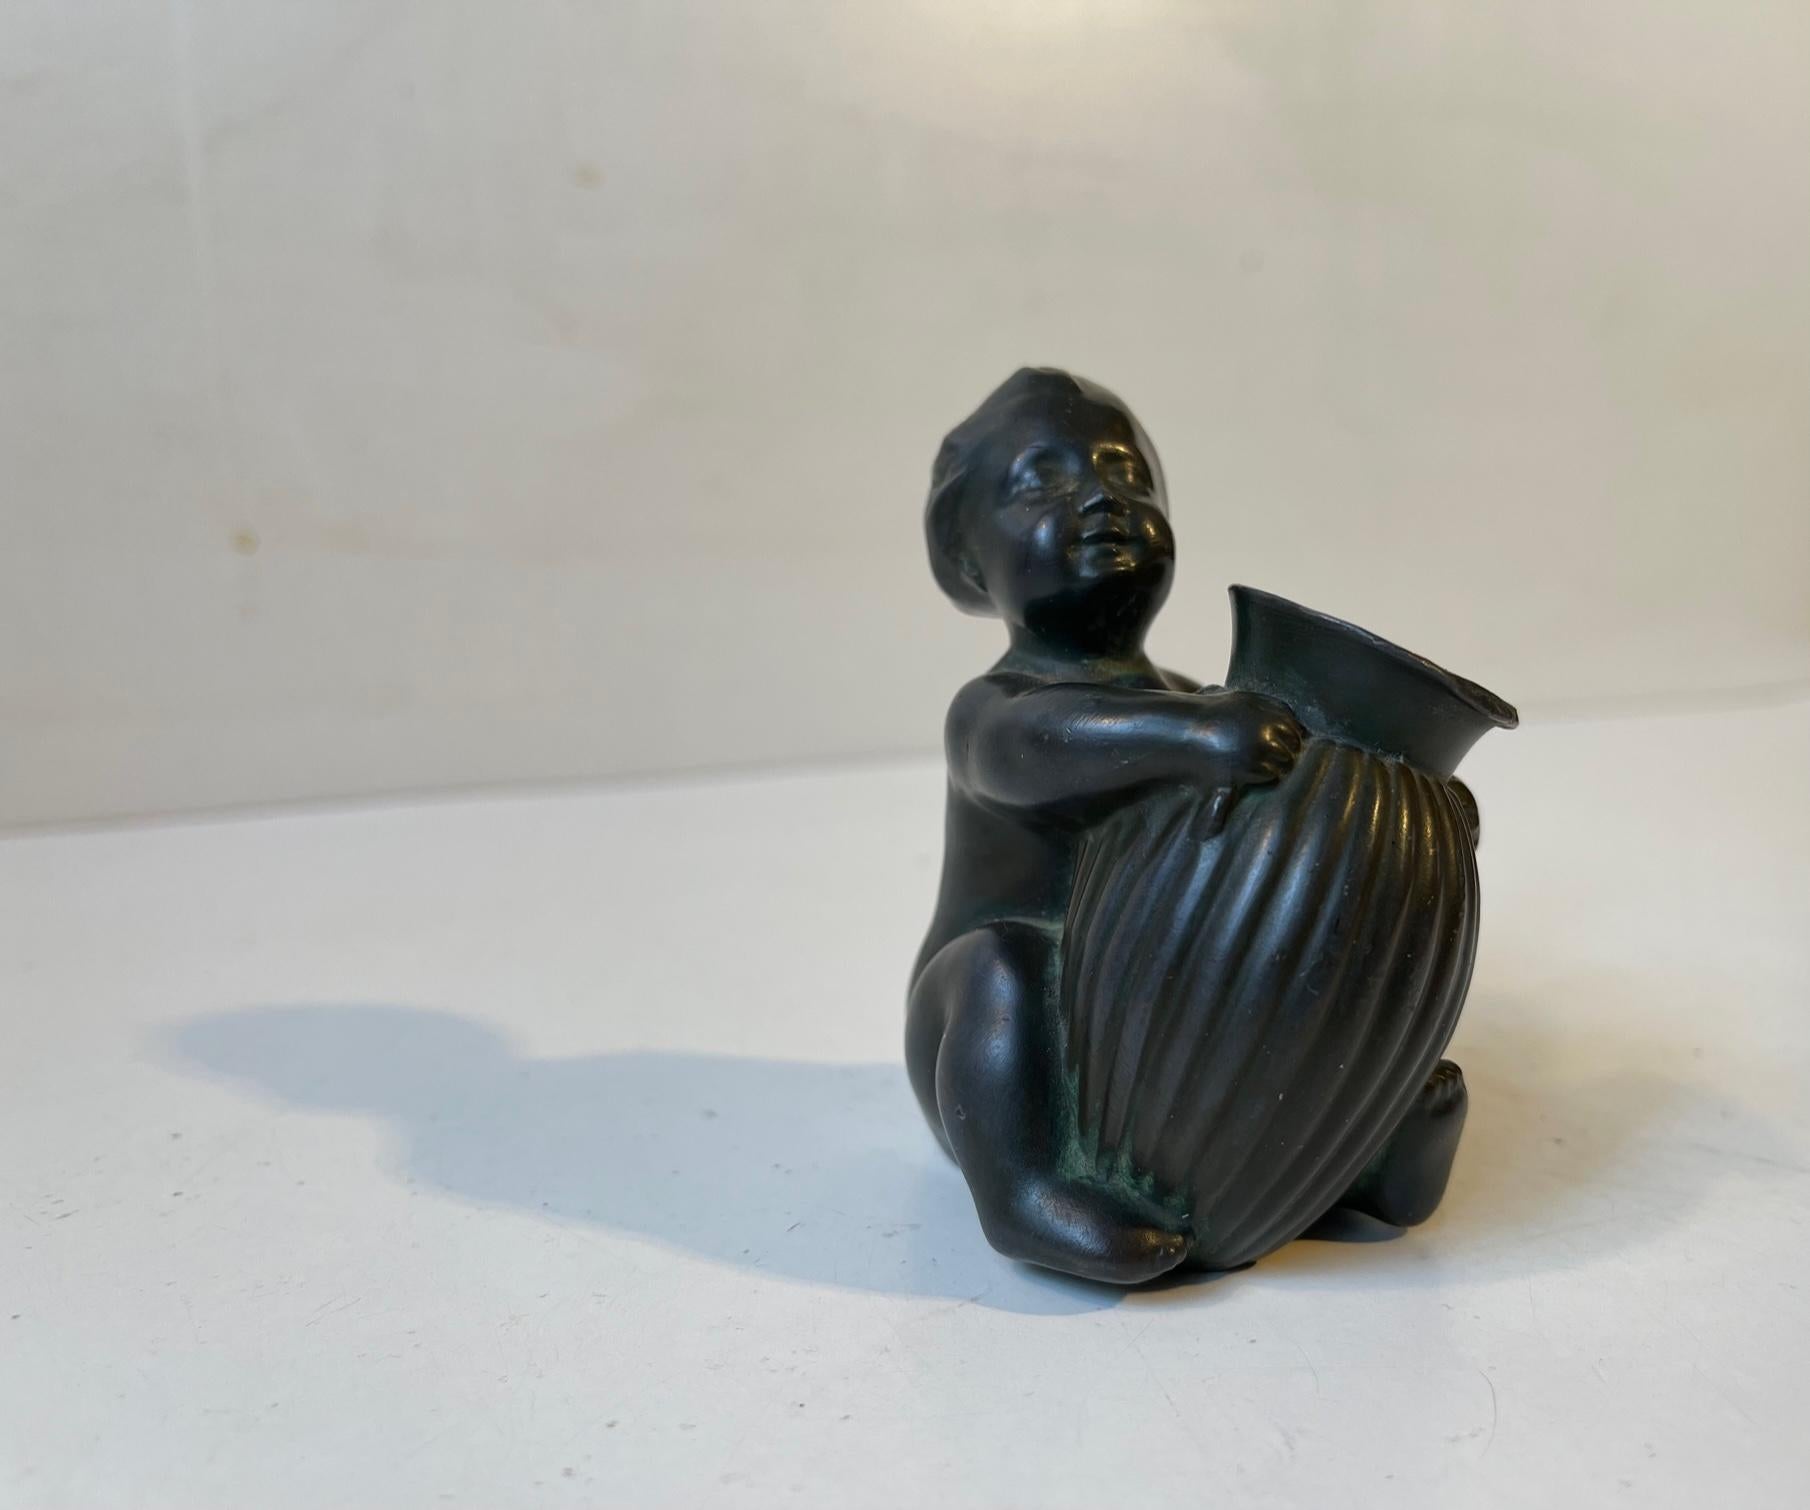 Small figurine/vase/pencil-holder from Just Andersen designed around 1930. Its Composed of Just Andersens own alloy/patina called Disko Metal. The figurine is signed to the side: Just, Denmark, D2096. Measurements: height: 8 cm, depth: 6 cm, wide: 5